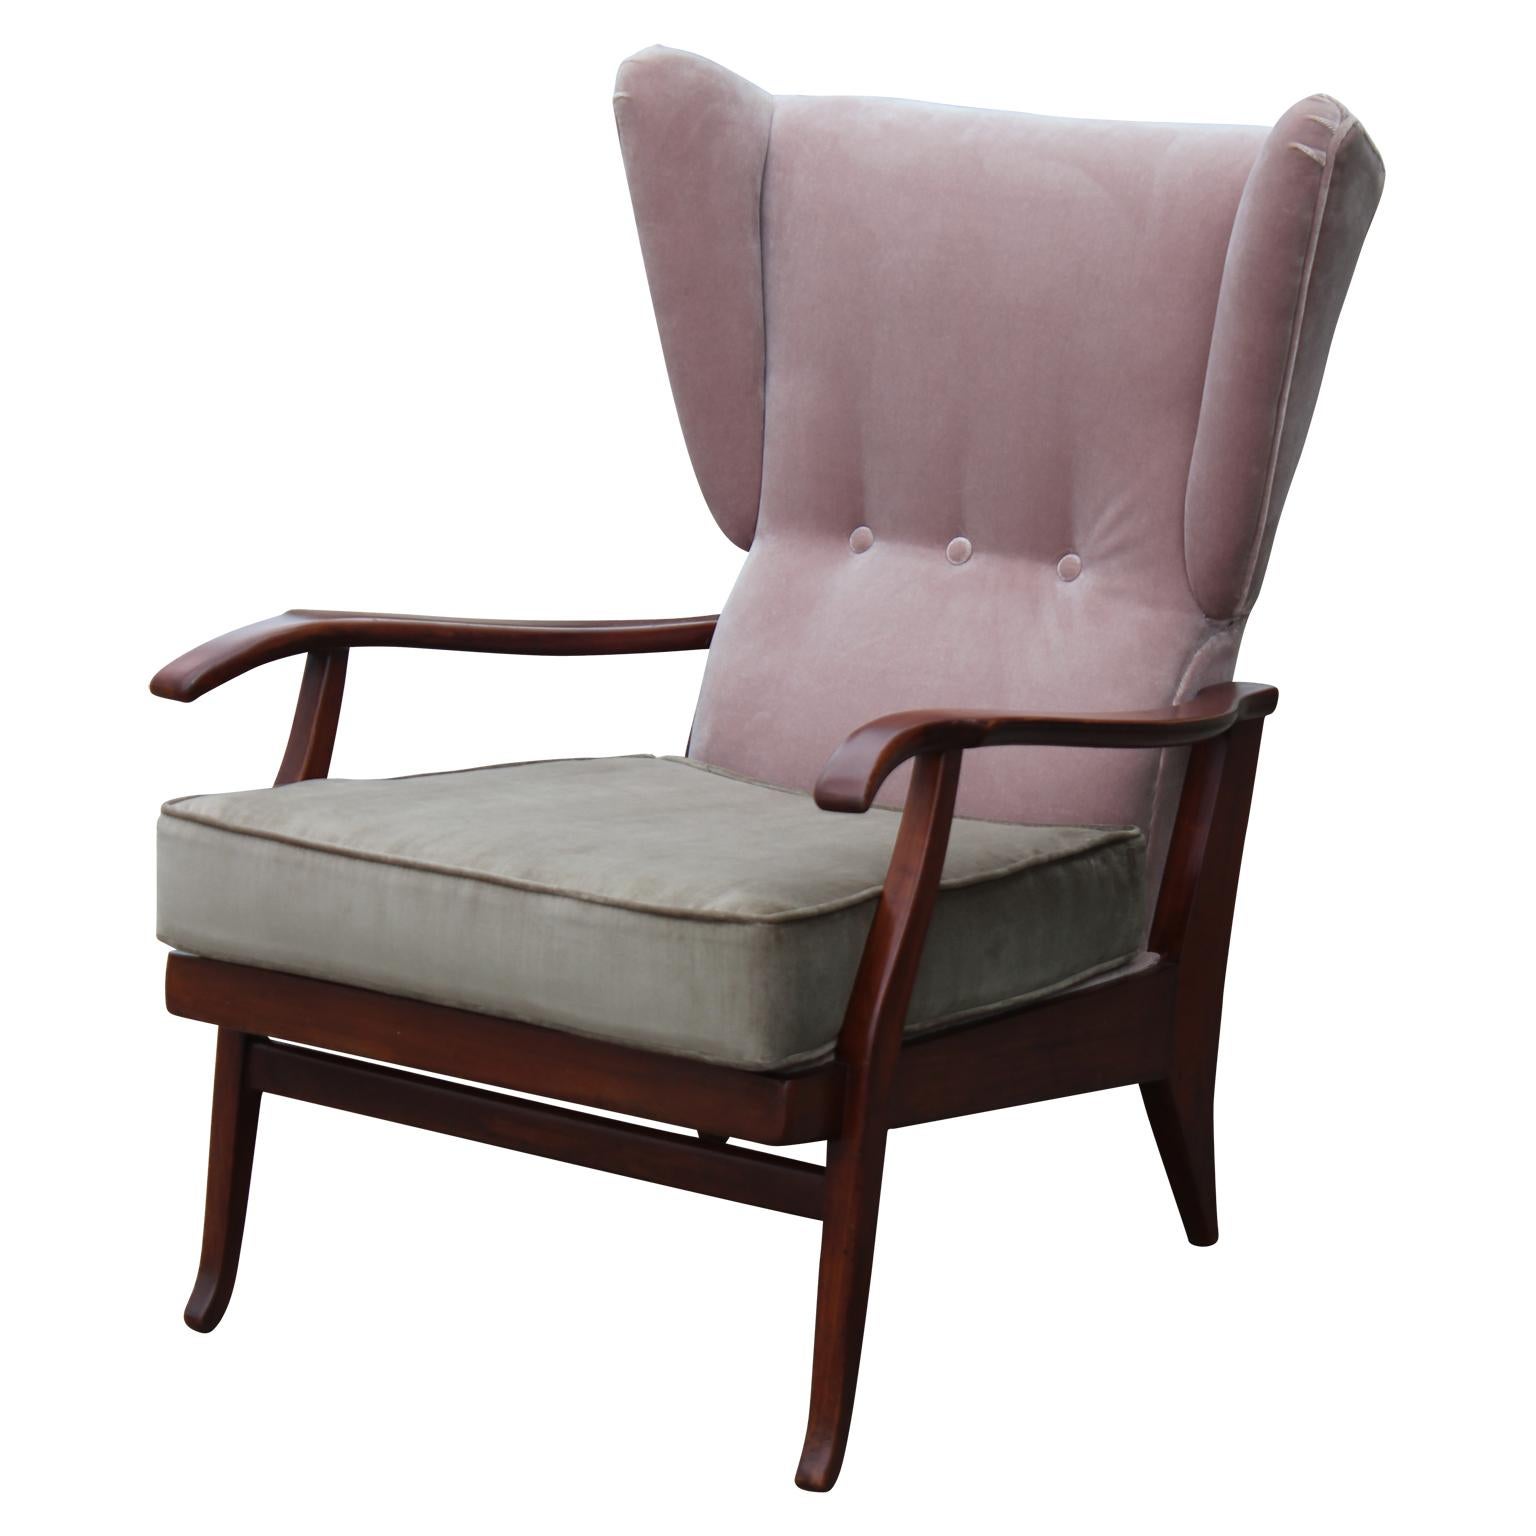 Incredible pair of Paolo Buffa style wingback reclining or adjustable chairs freshly upholstered in dusty pink/mauve velvet with grey/taupe colored cushions. Chairs can be in an upright or reclining position. Walnut wood frames have elegant curved